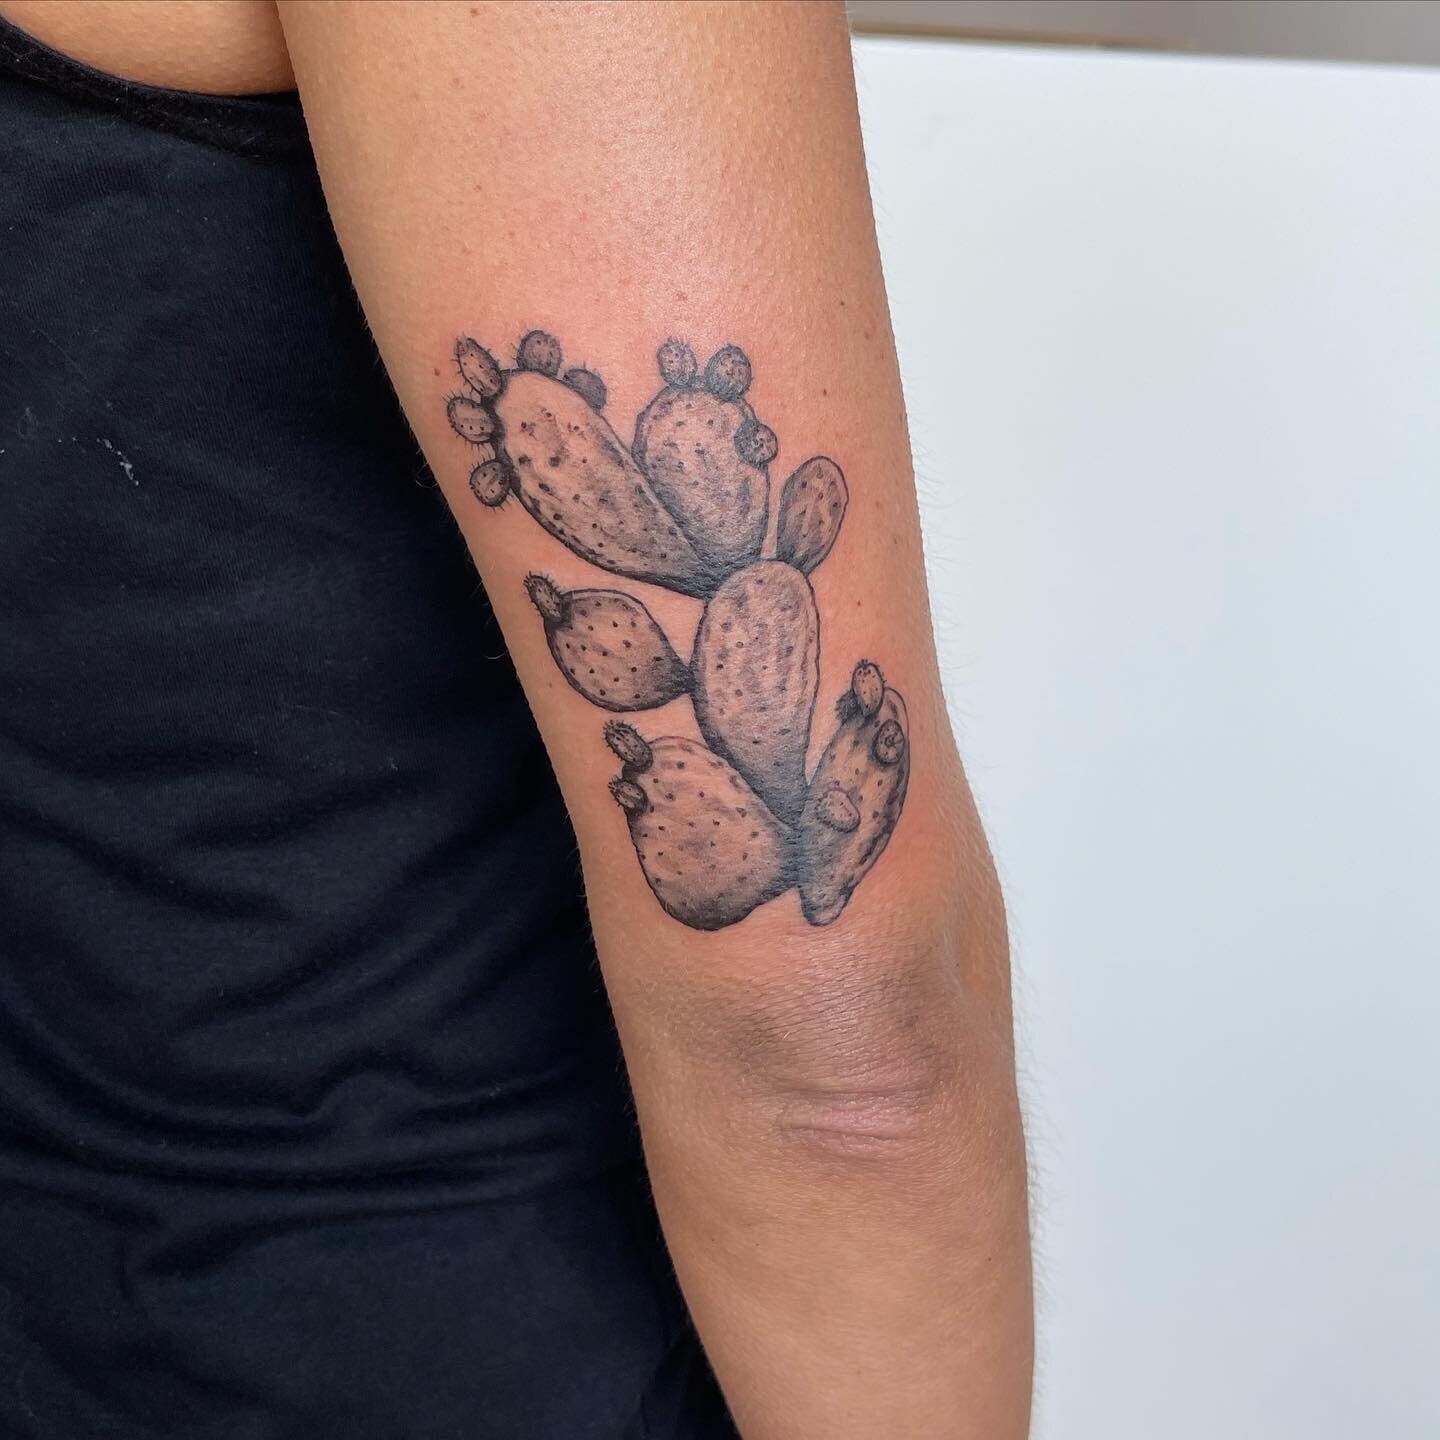 i absolutely loved this prickly pear cactus from today! there&rsquo;s something just so therapeutic about creating a cactus! 🌵 thank you so much for being so awesome @danihairchicago !

&mdash;&mdash;&mdash;&mdash;&mdash;&mdash;&mdash;&mdash;&mdash;